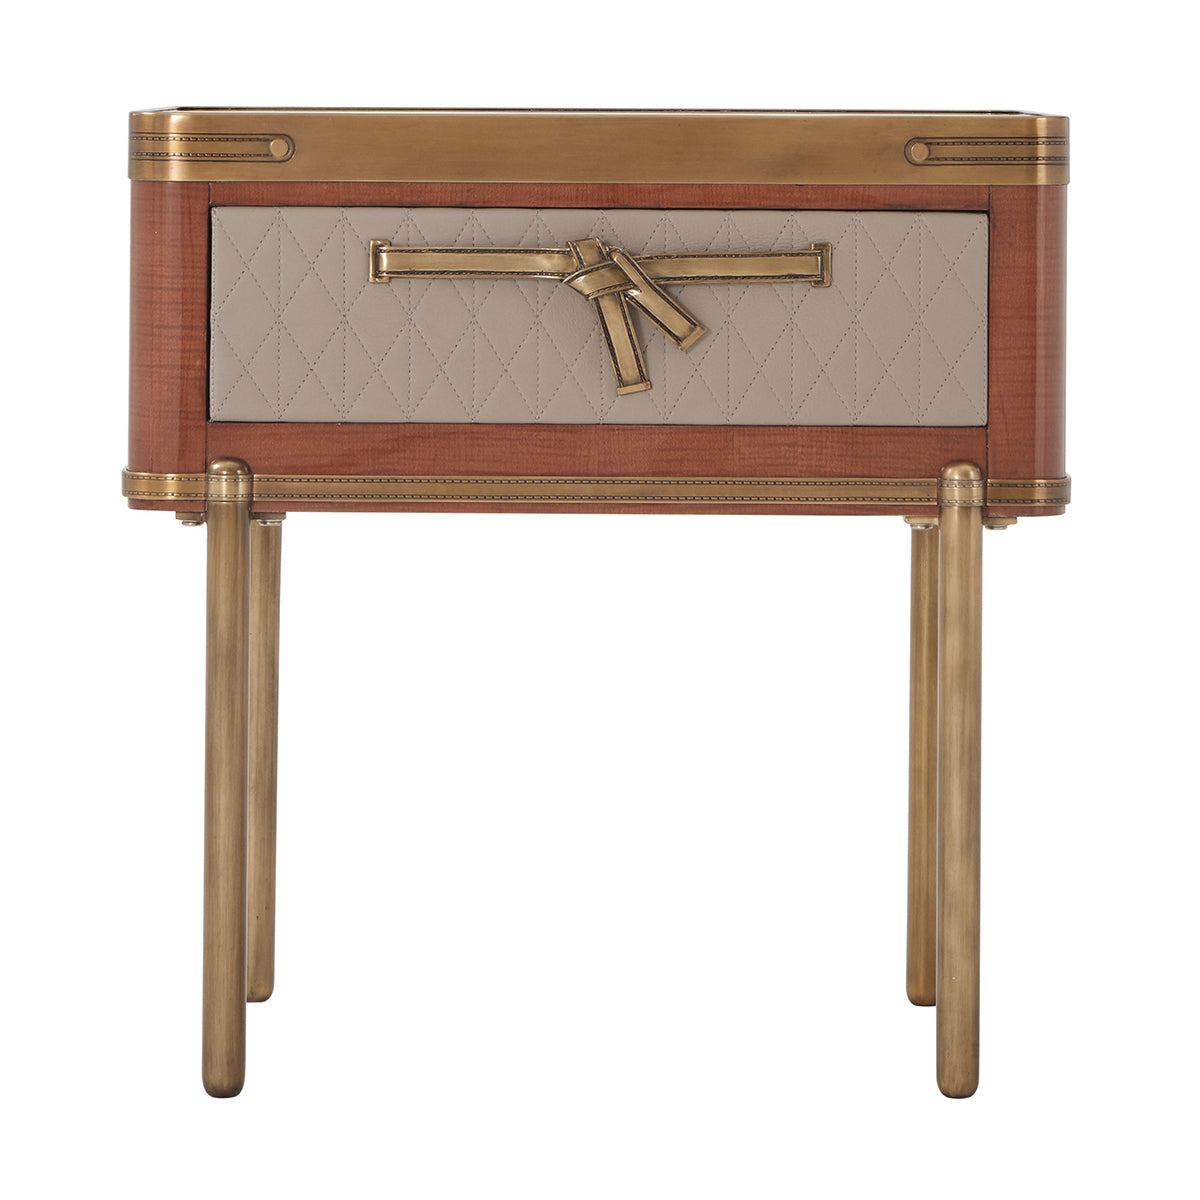 ICONIC LEATHER SIDE TABLE